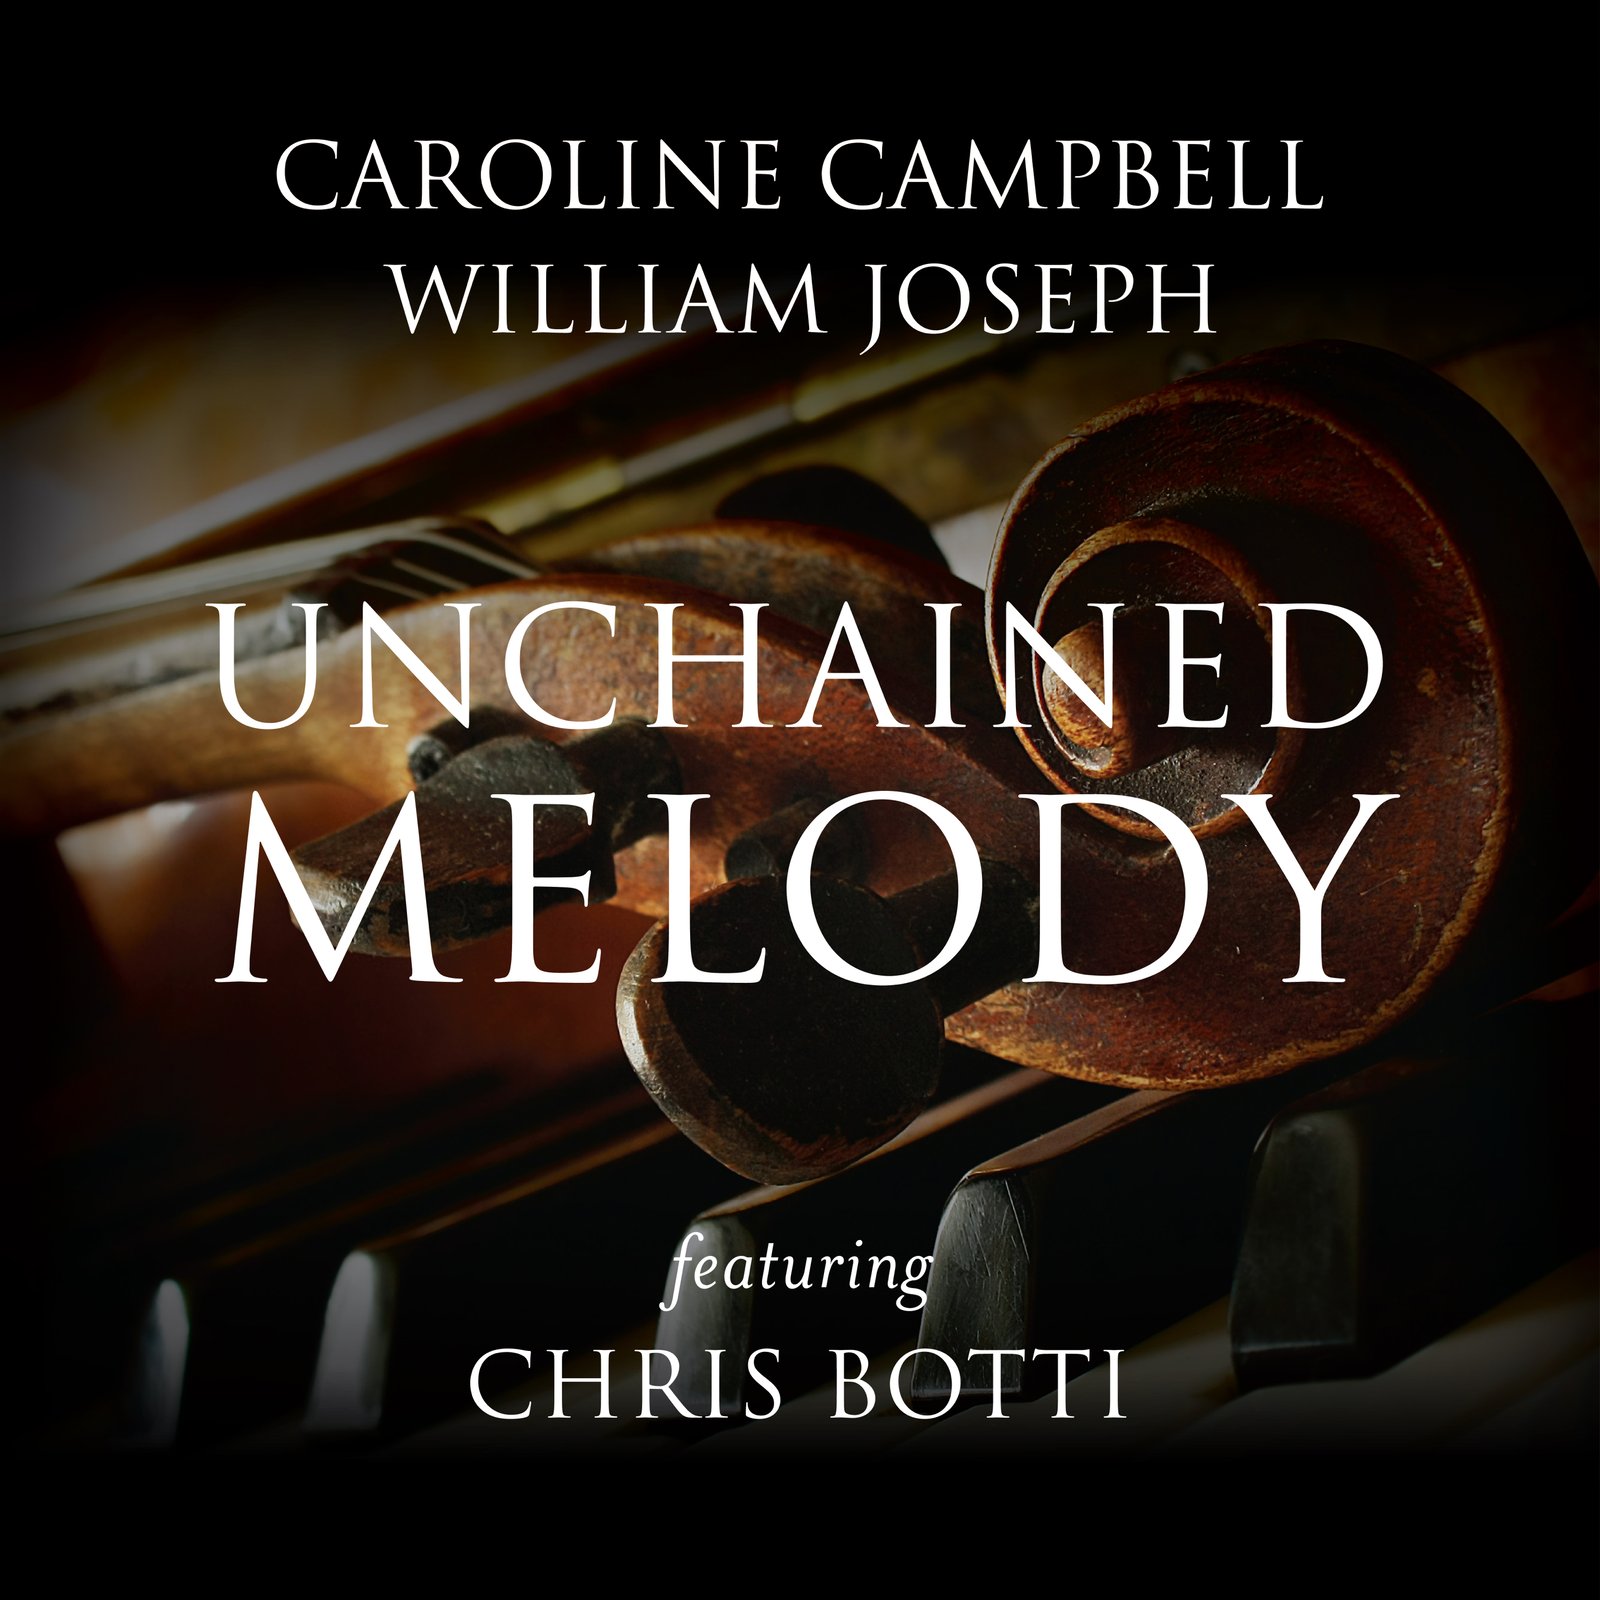 Unchained Melody (Sheet Music) / Caroline Campbell Store